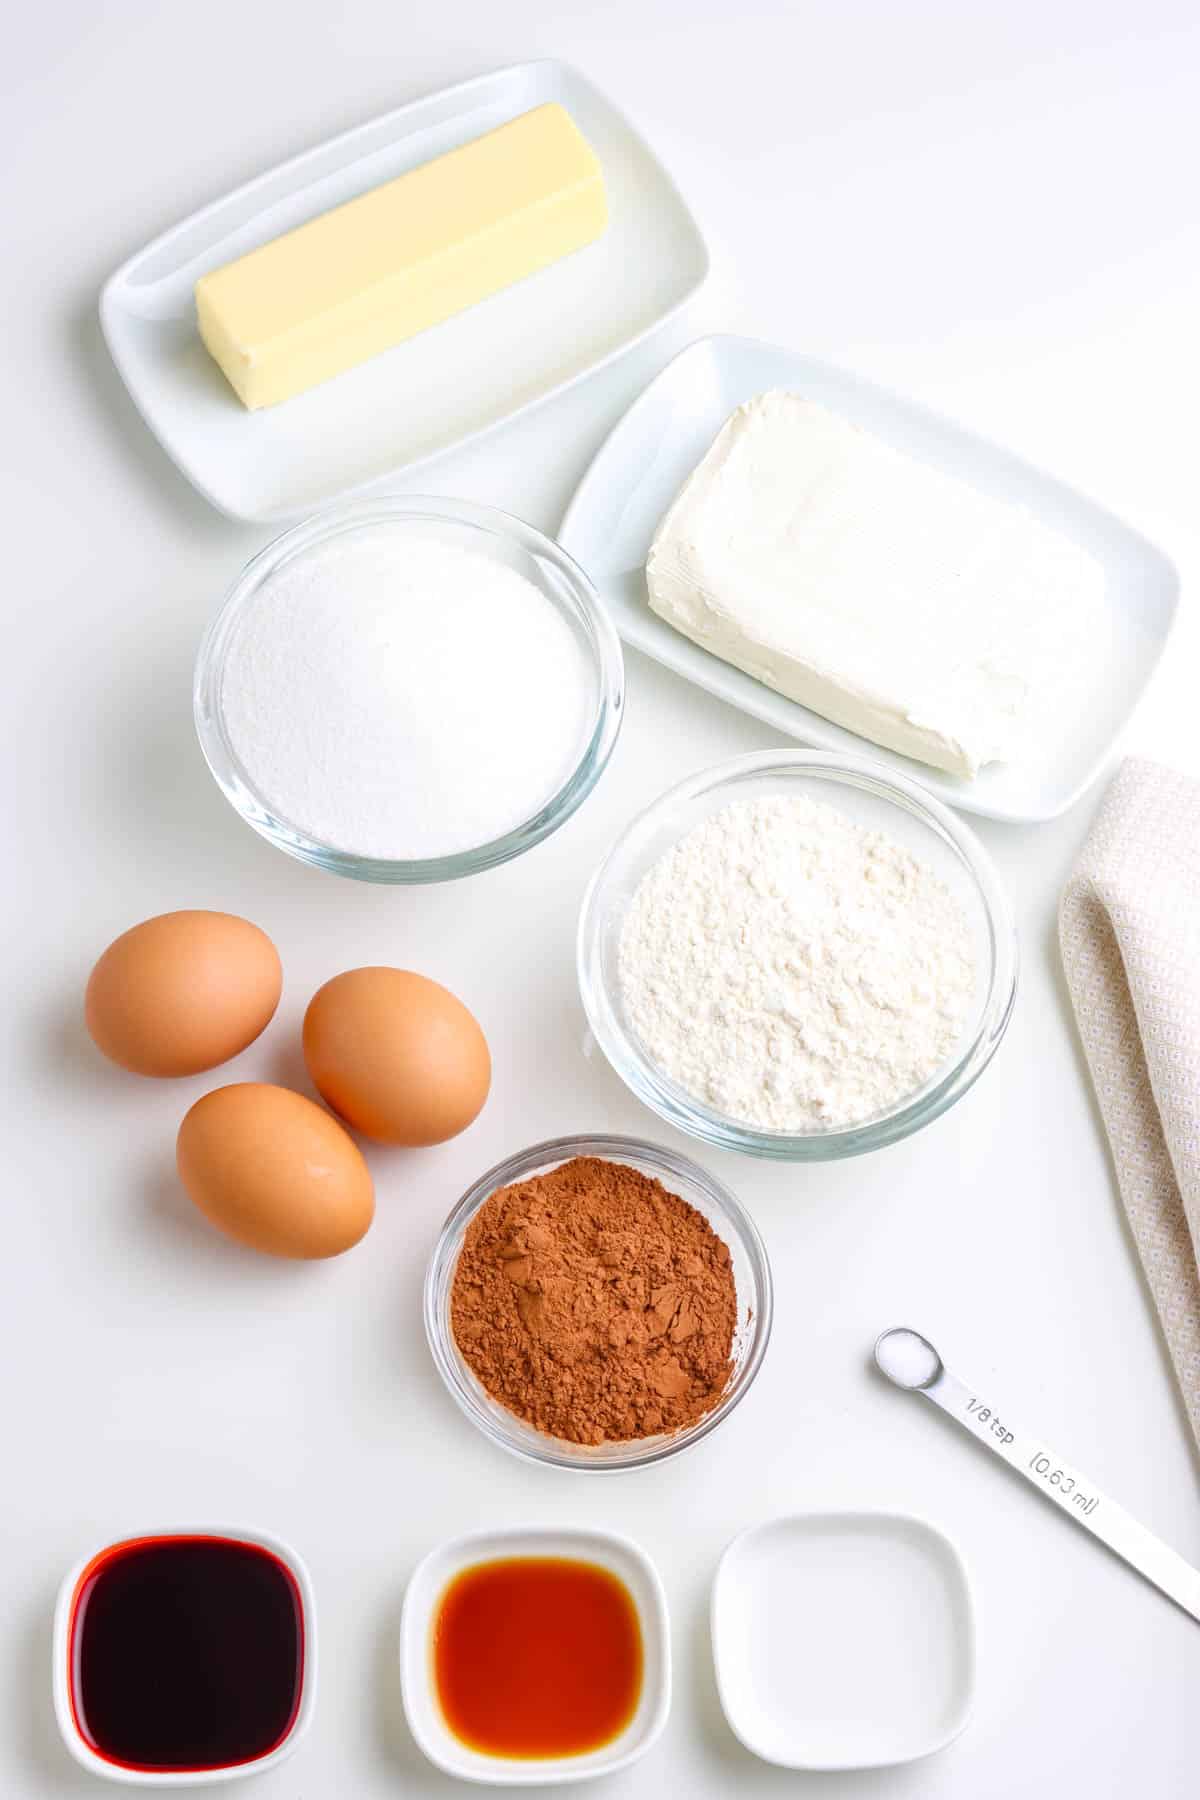 All of the ingredients needed to make this recipe.